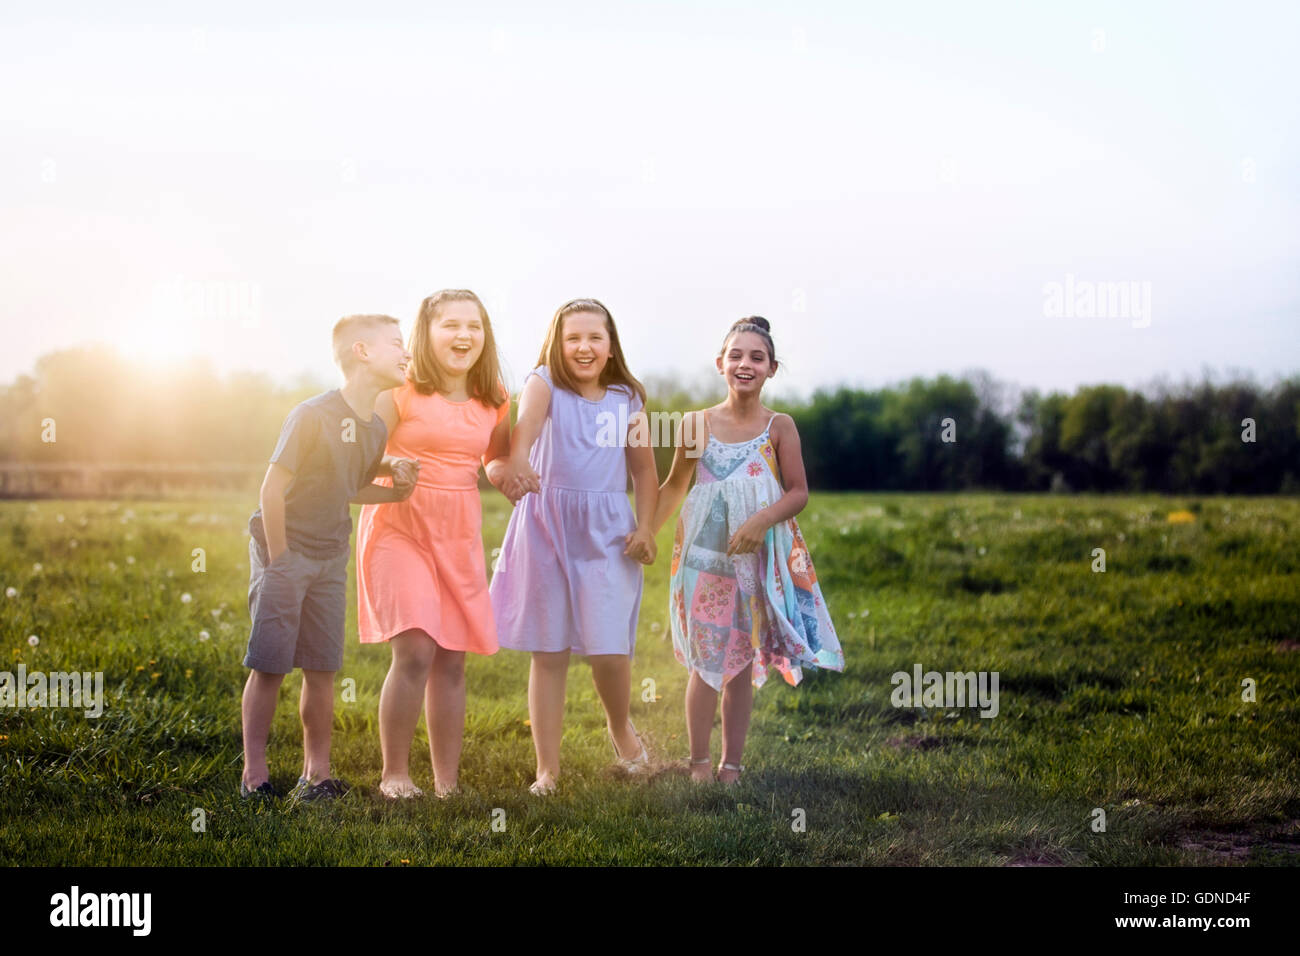 Children in field holding hands laughing Stock Photo